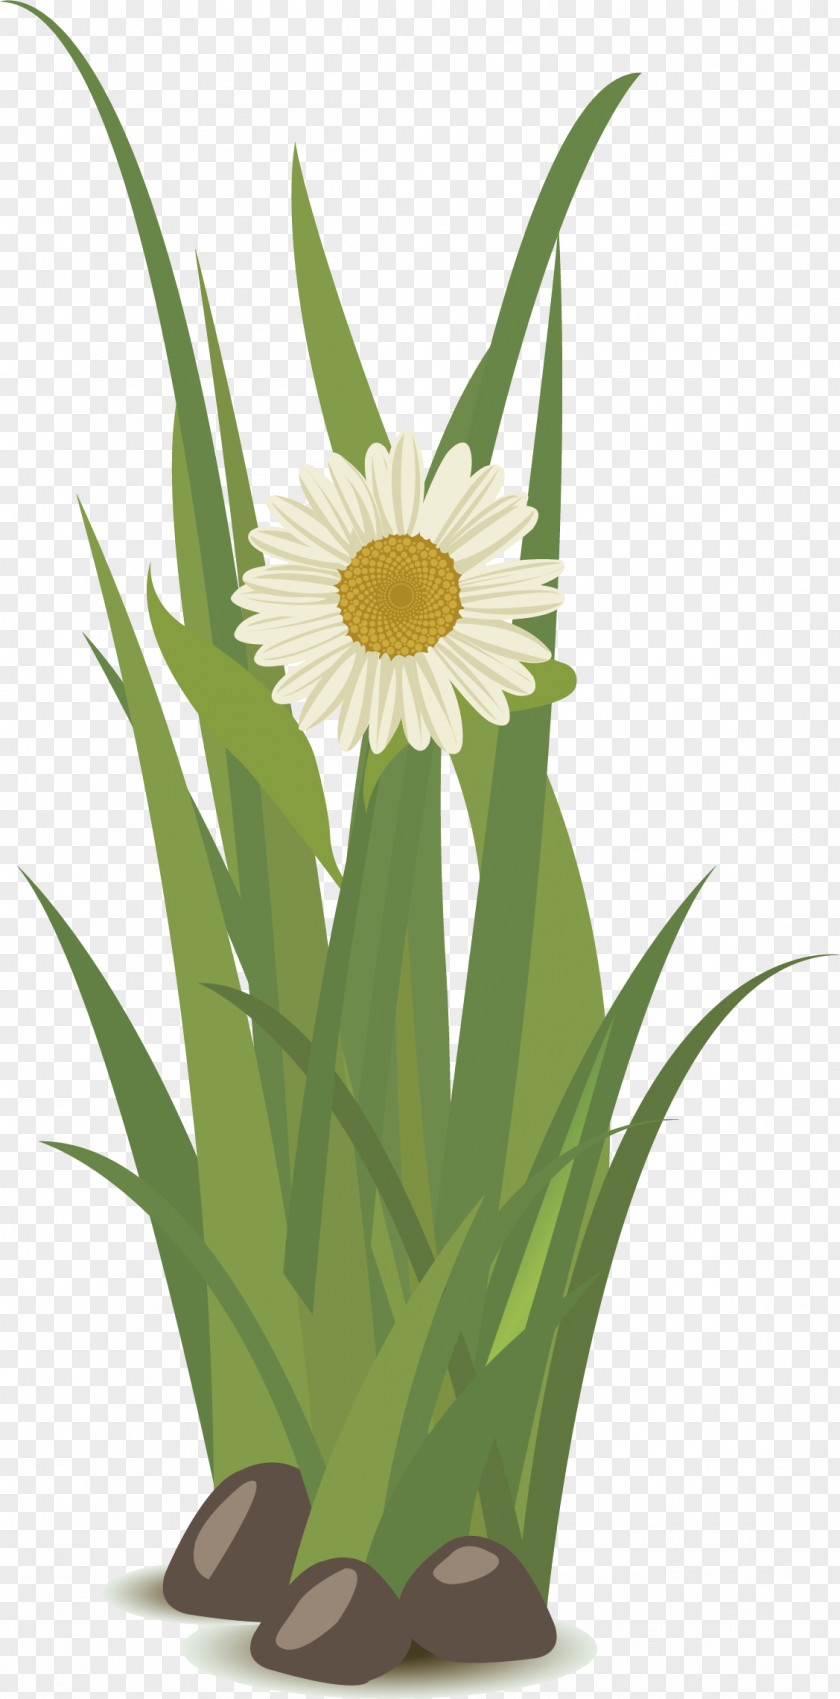 Green Grass Vector Yellow Floral Design PNG